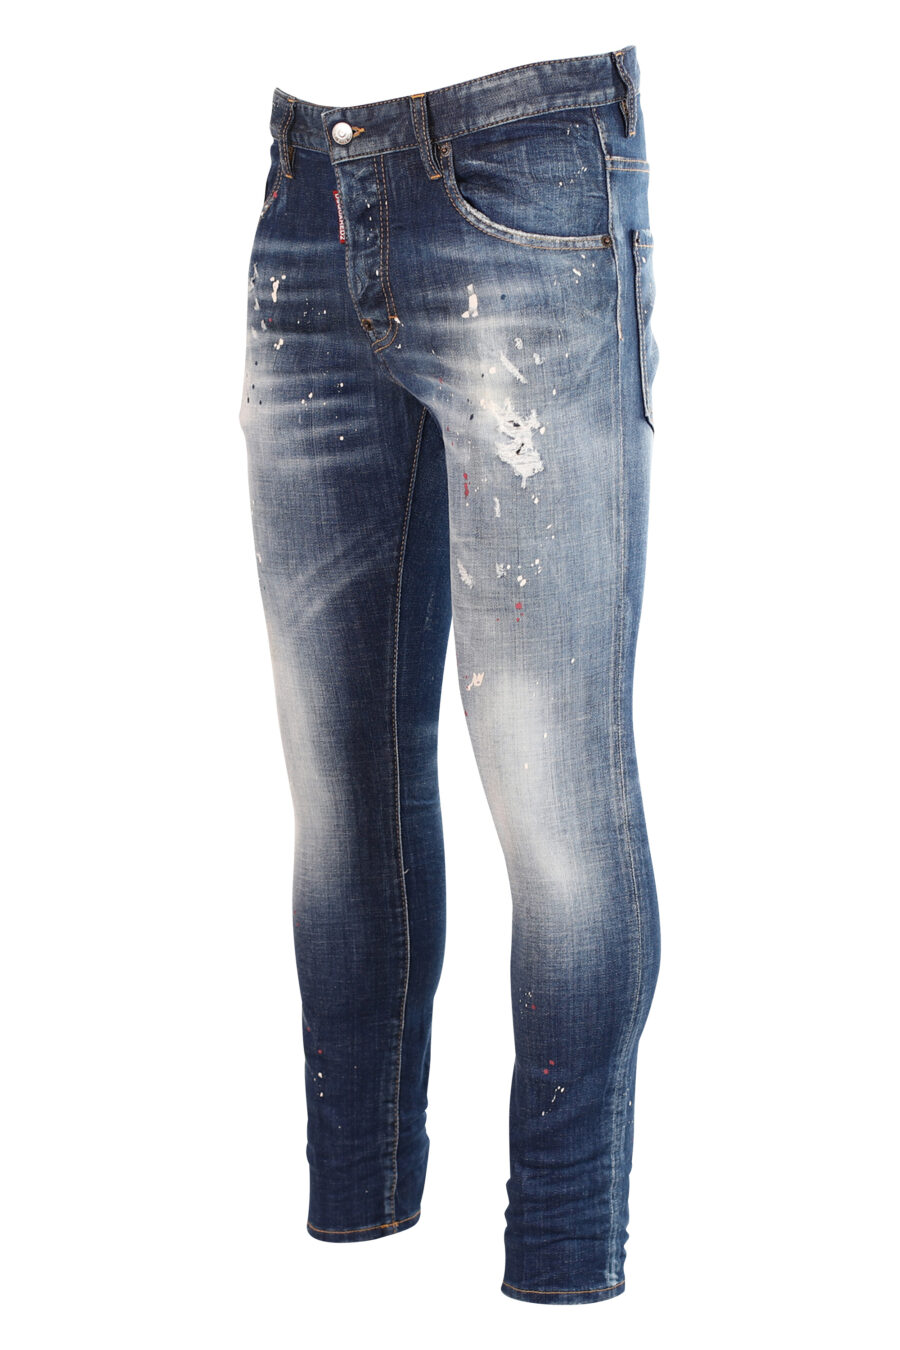 Semi-worn blue "skater" jeans with paint and rips - 8052134940020 2